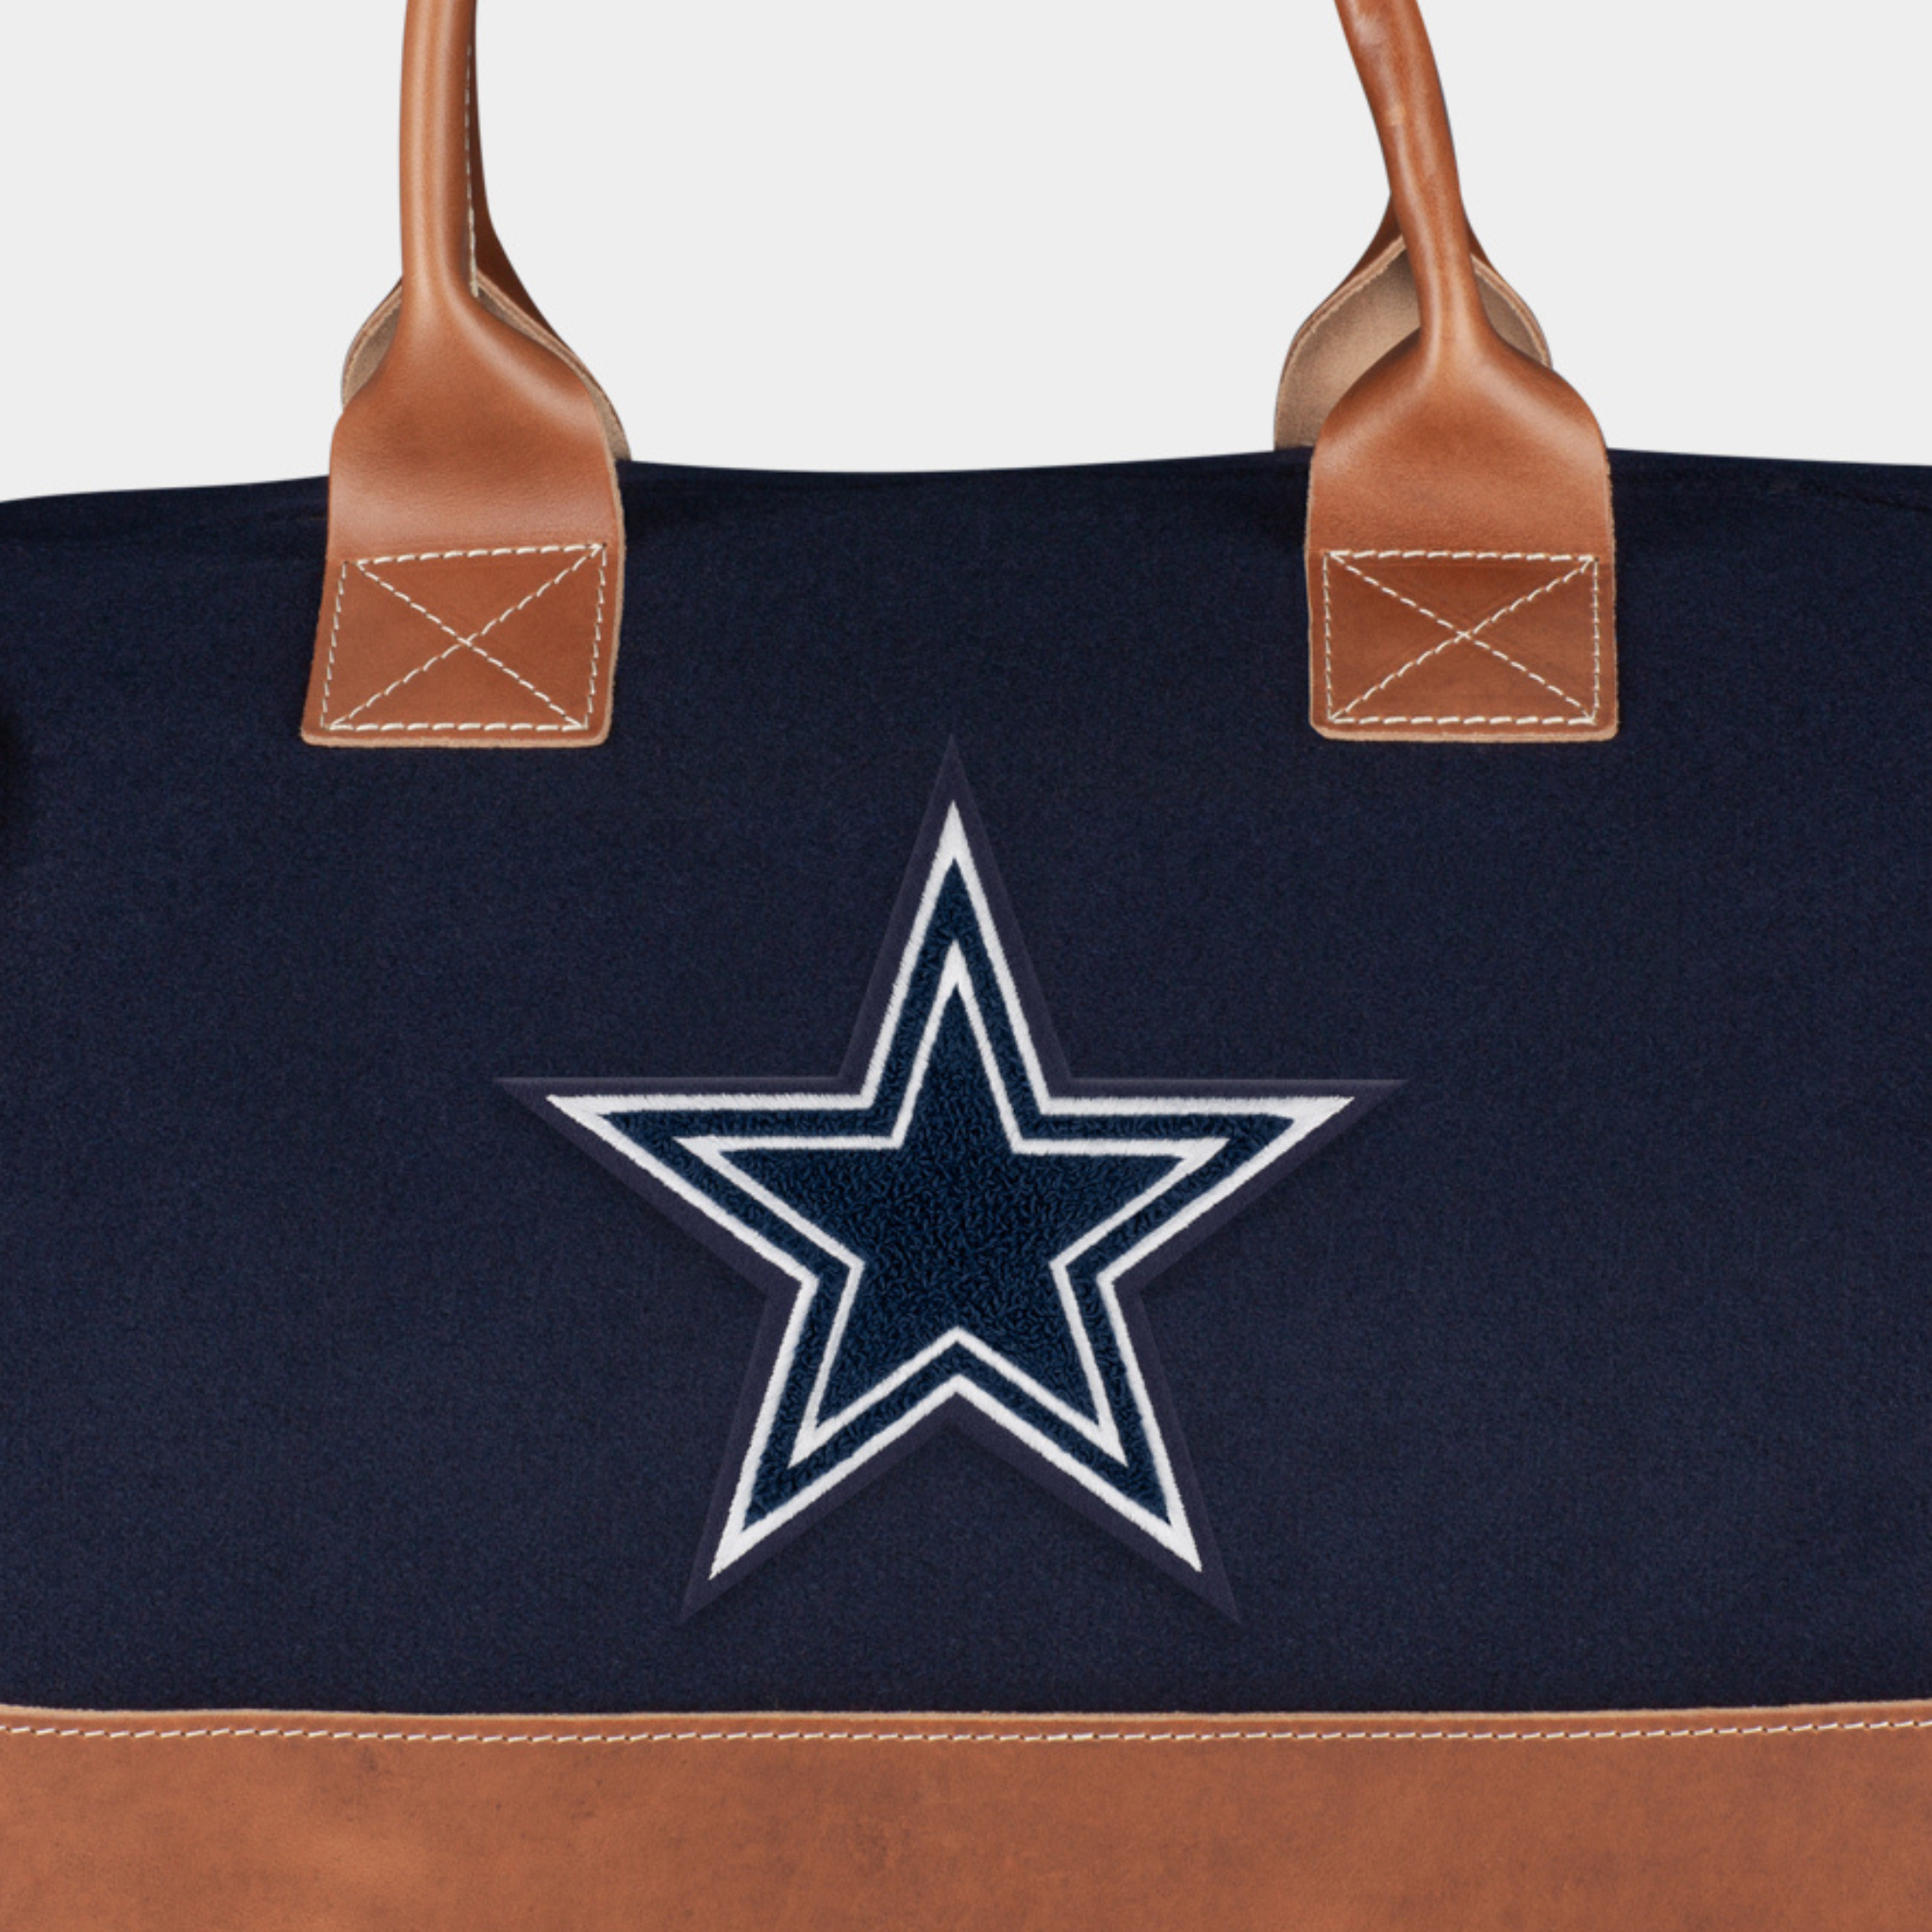 Dallas Cowboys NFL Spirited Style Printed Collection Tote Bag